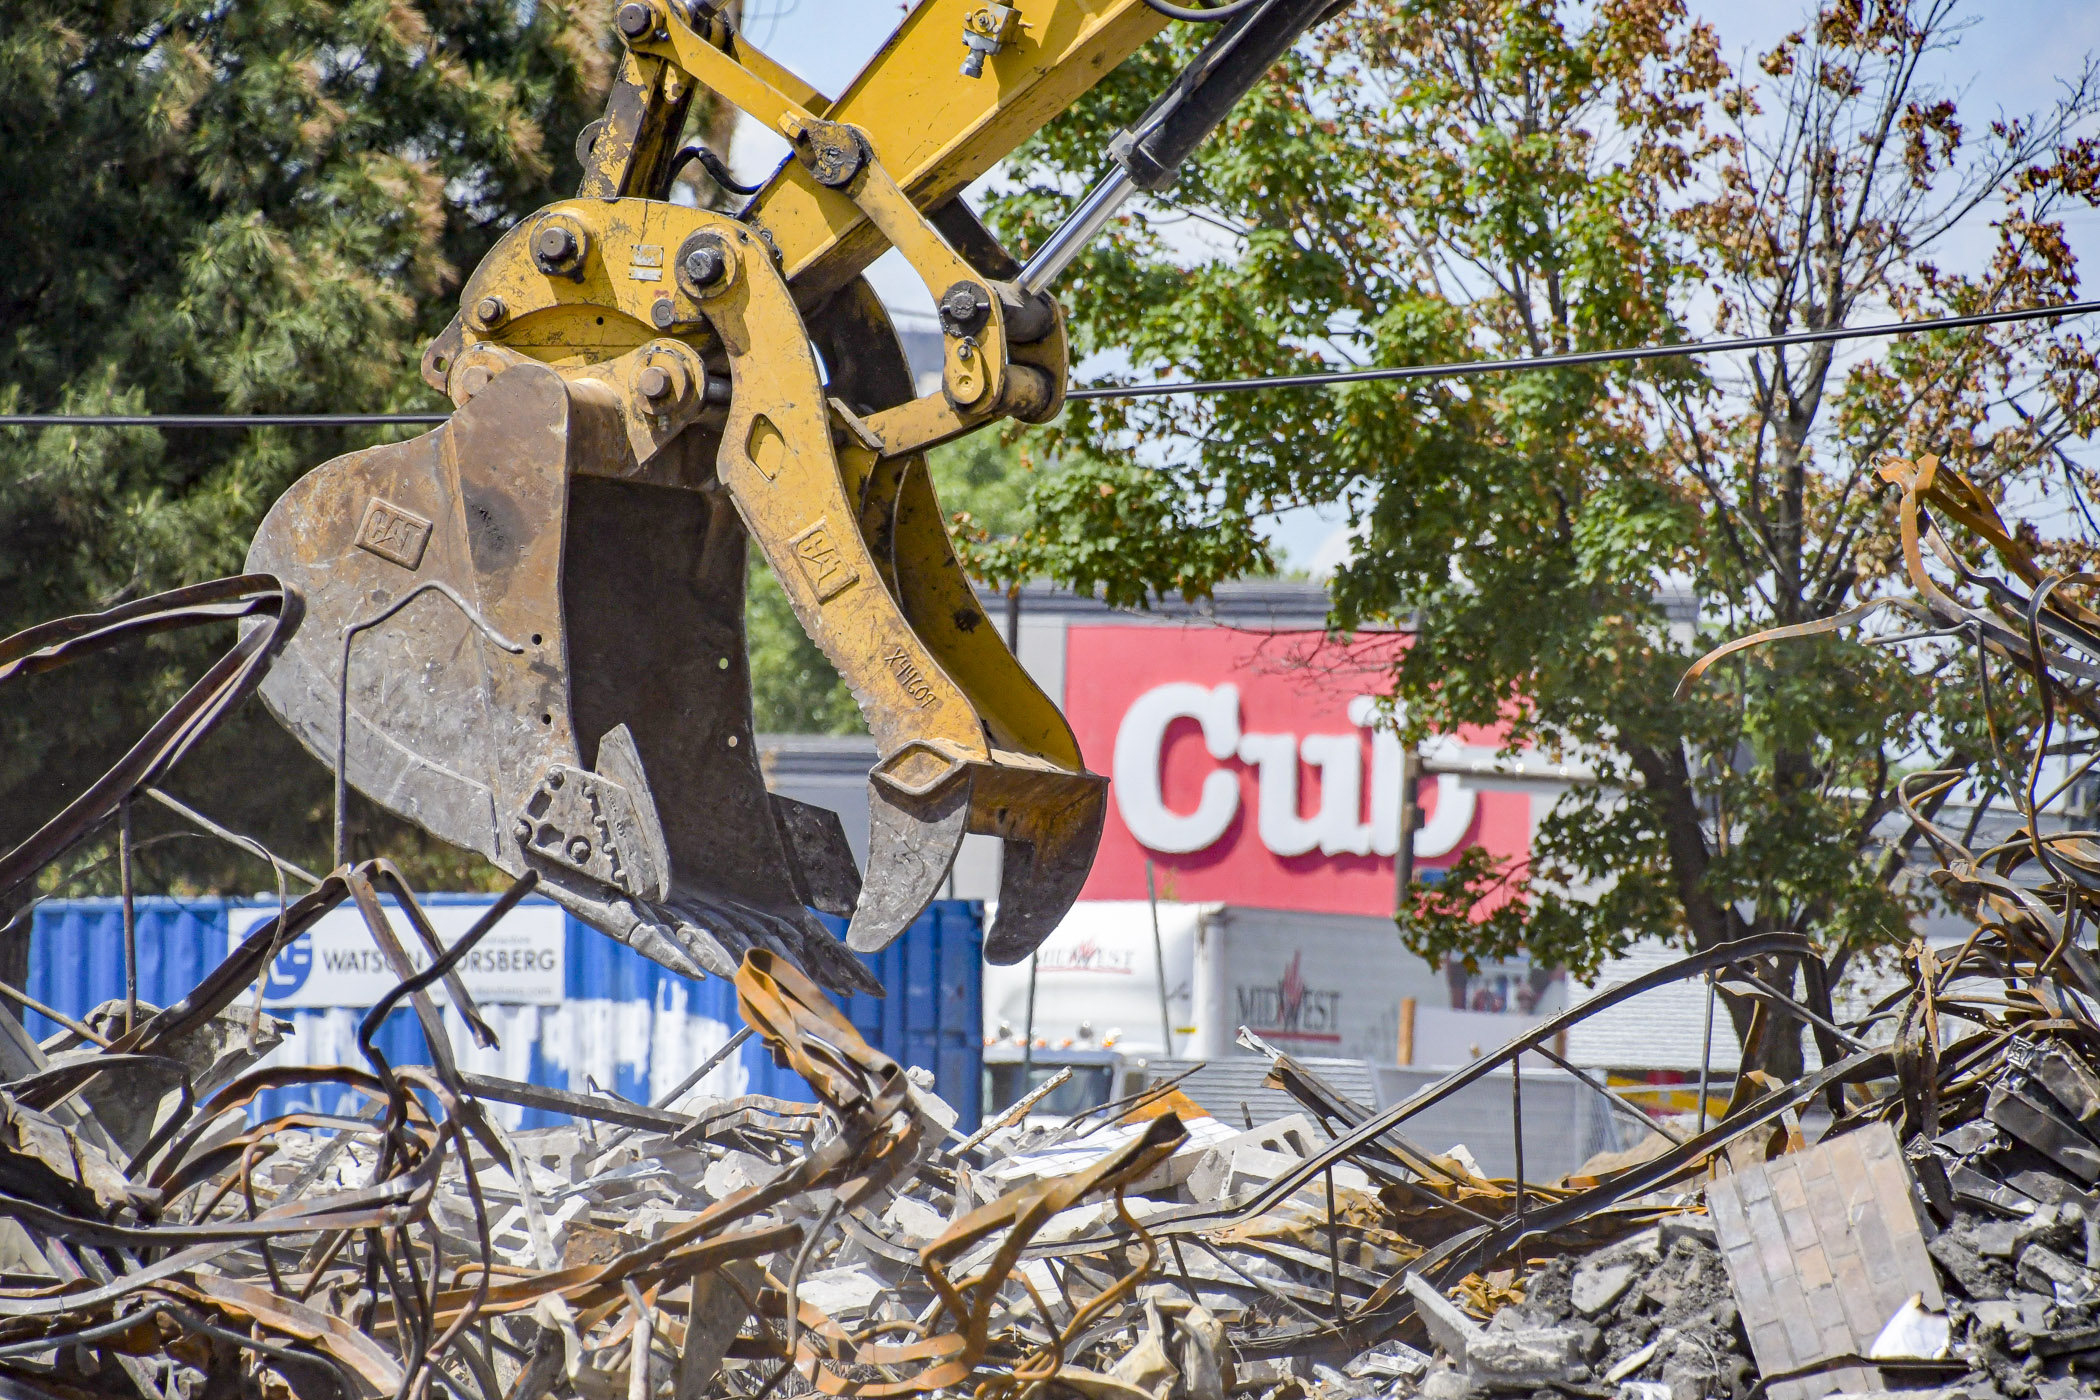 Cleanup on Lake Street in Minneapolis following last year's civil unrest. Photo by Andrew VonBank